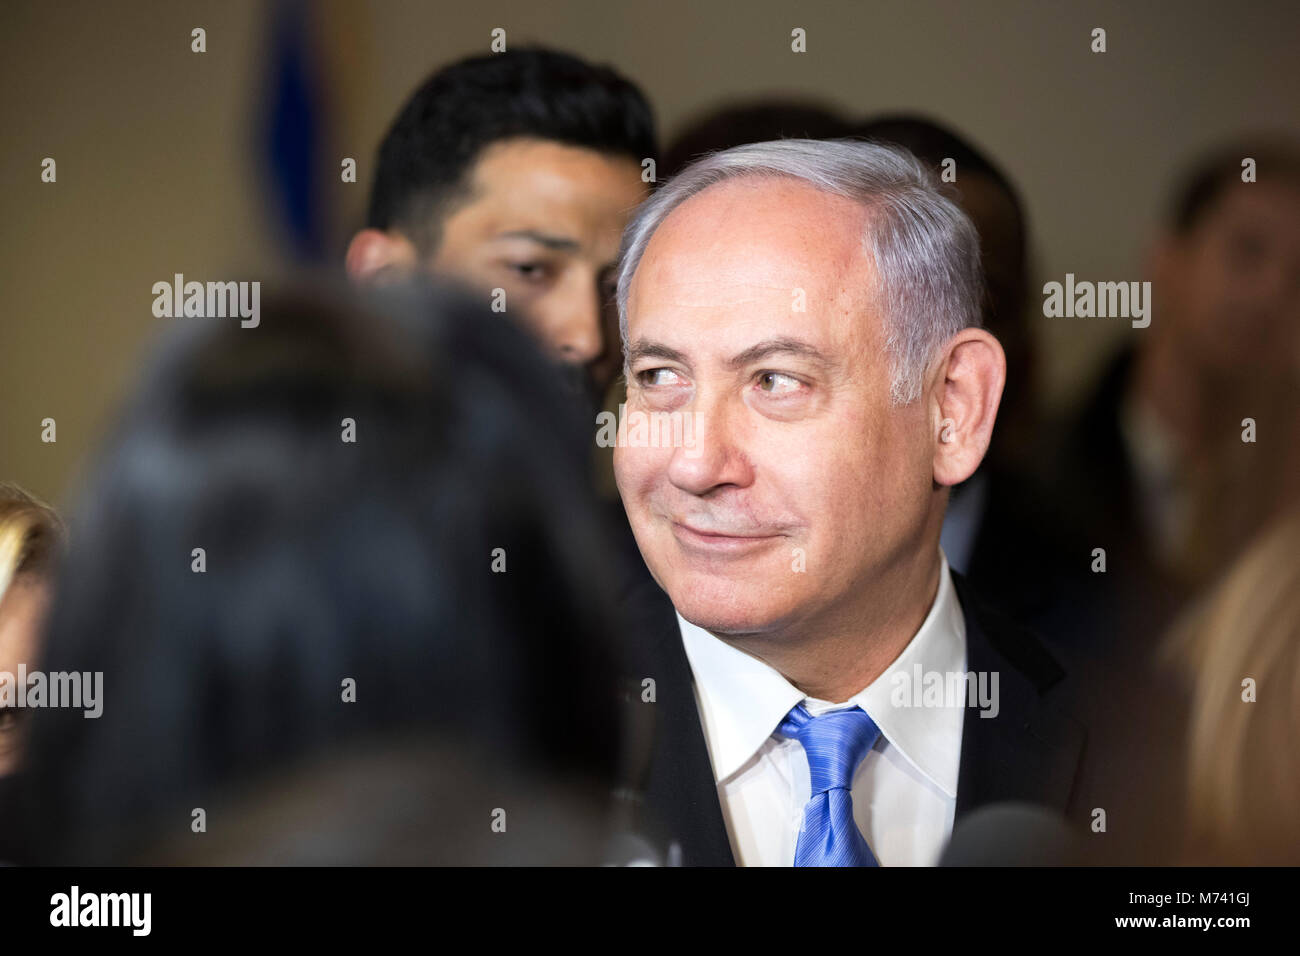 (180308) -- UNITED NATIONS, March 8, 2018 (Xinhua) -- Israeli Prime Minister Benjamin Netanyahu attends the exhibition '3000 years of history: Jews in Jerusalem' at the United Nations headquarters in New York, March 8, 2018. (Xinhua/Li Muzi) Stock Photo